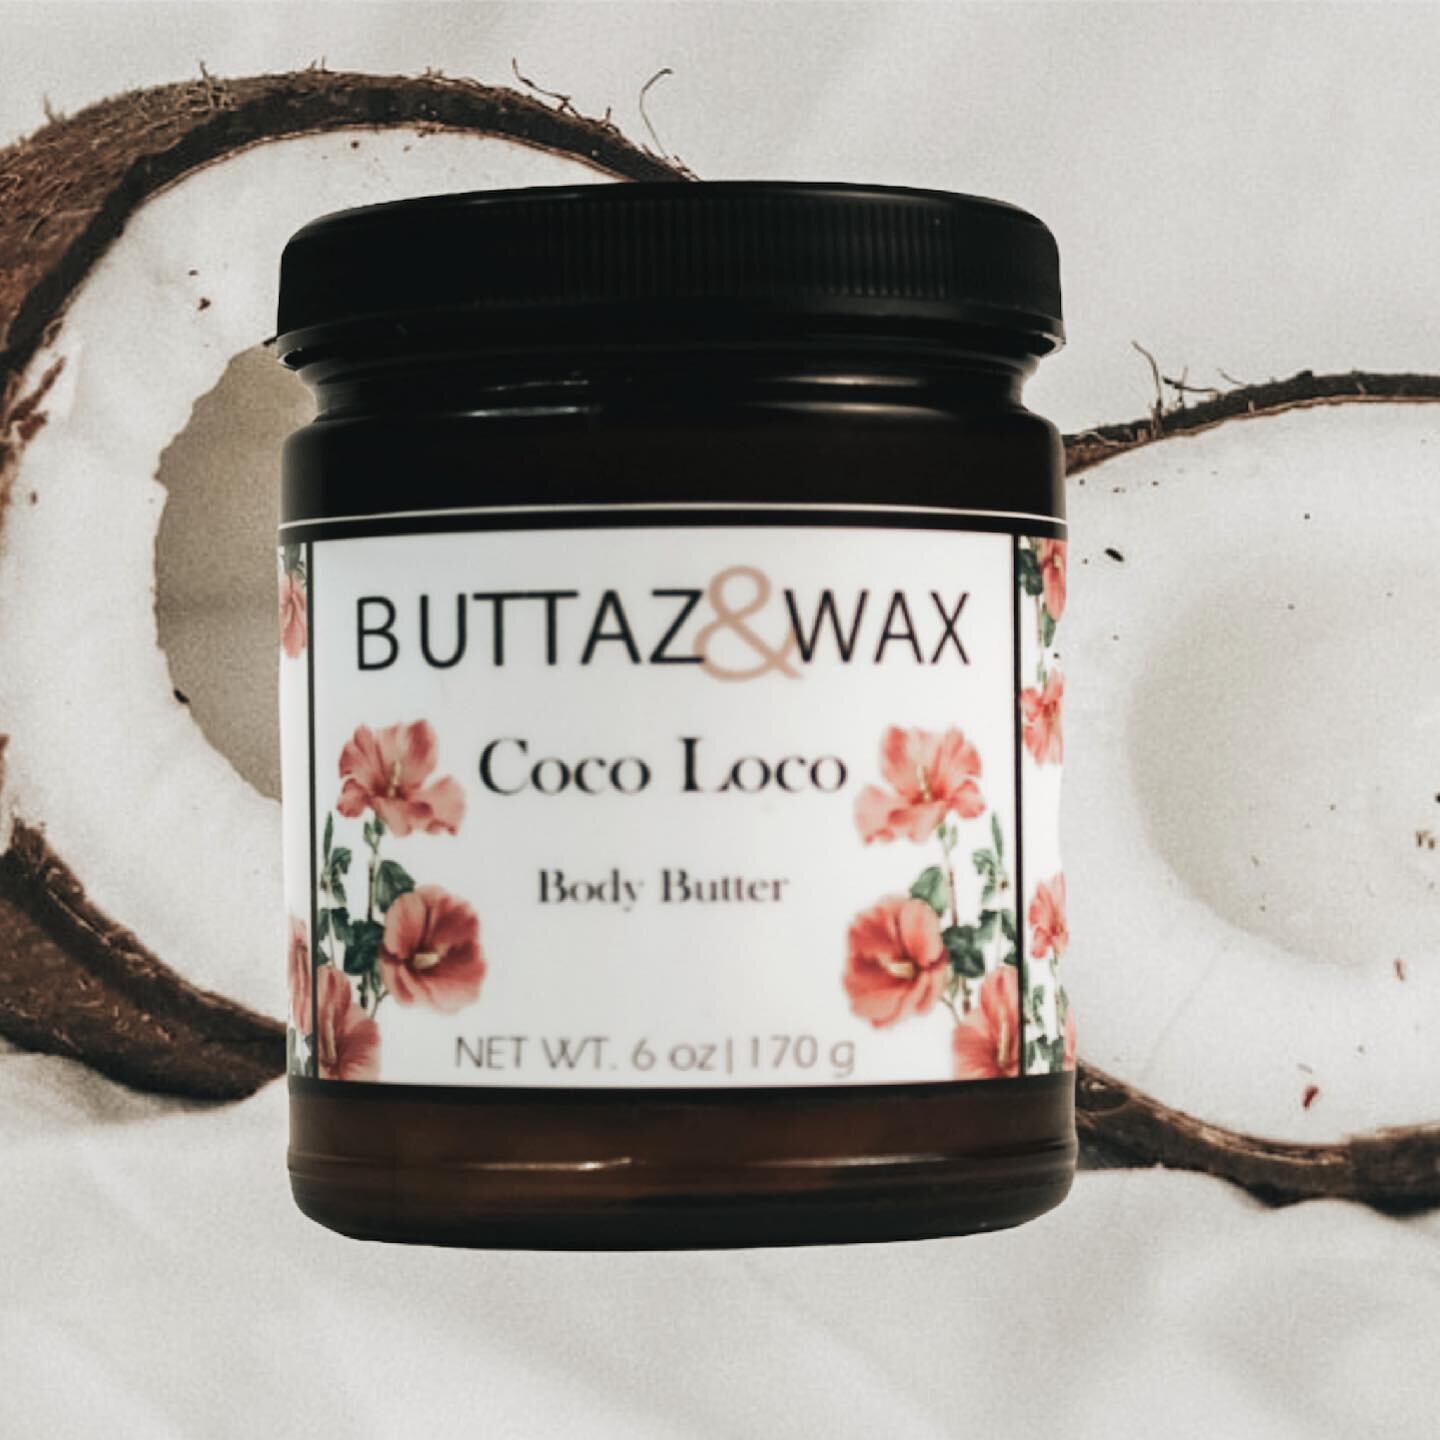 2 Butters, 5 Oils and the beautiful smell of coconut makes up or  Coco Loco Body Butter..